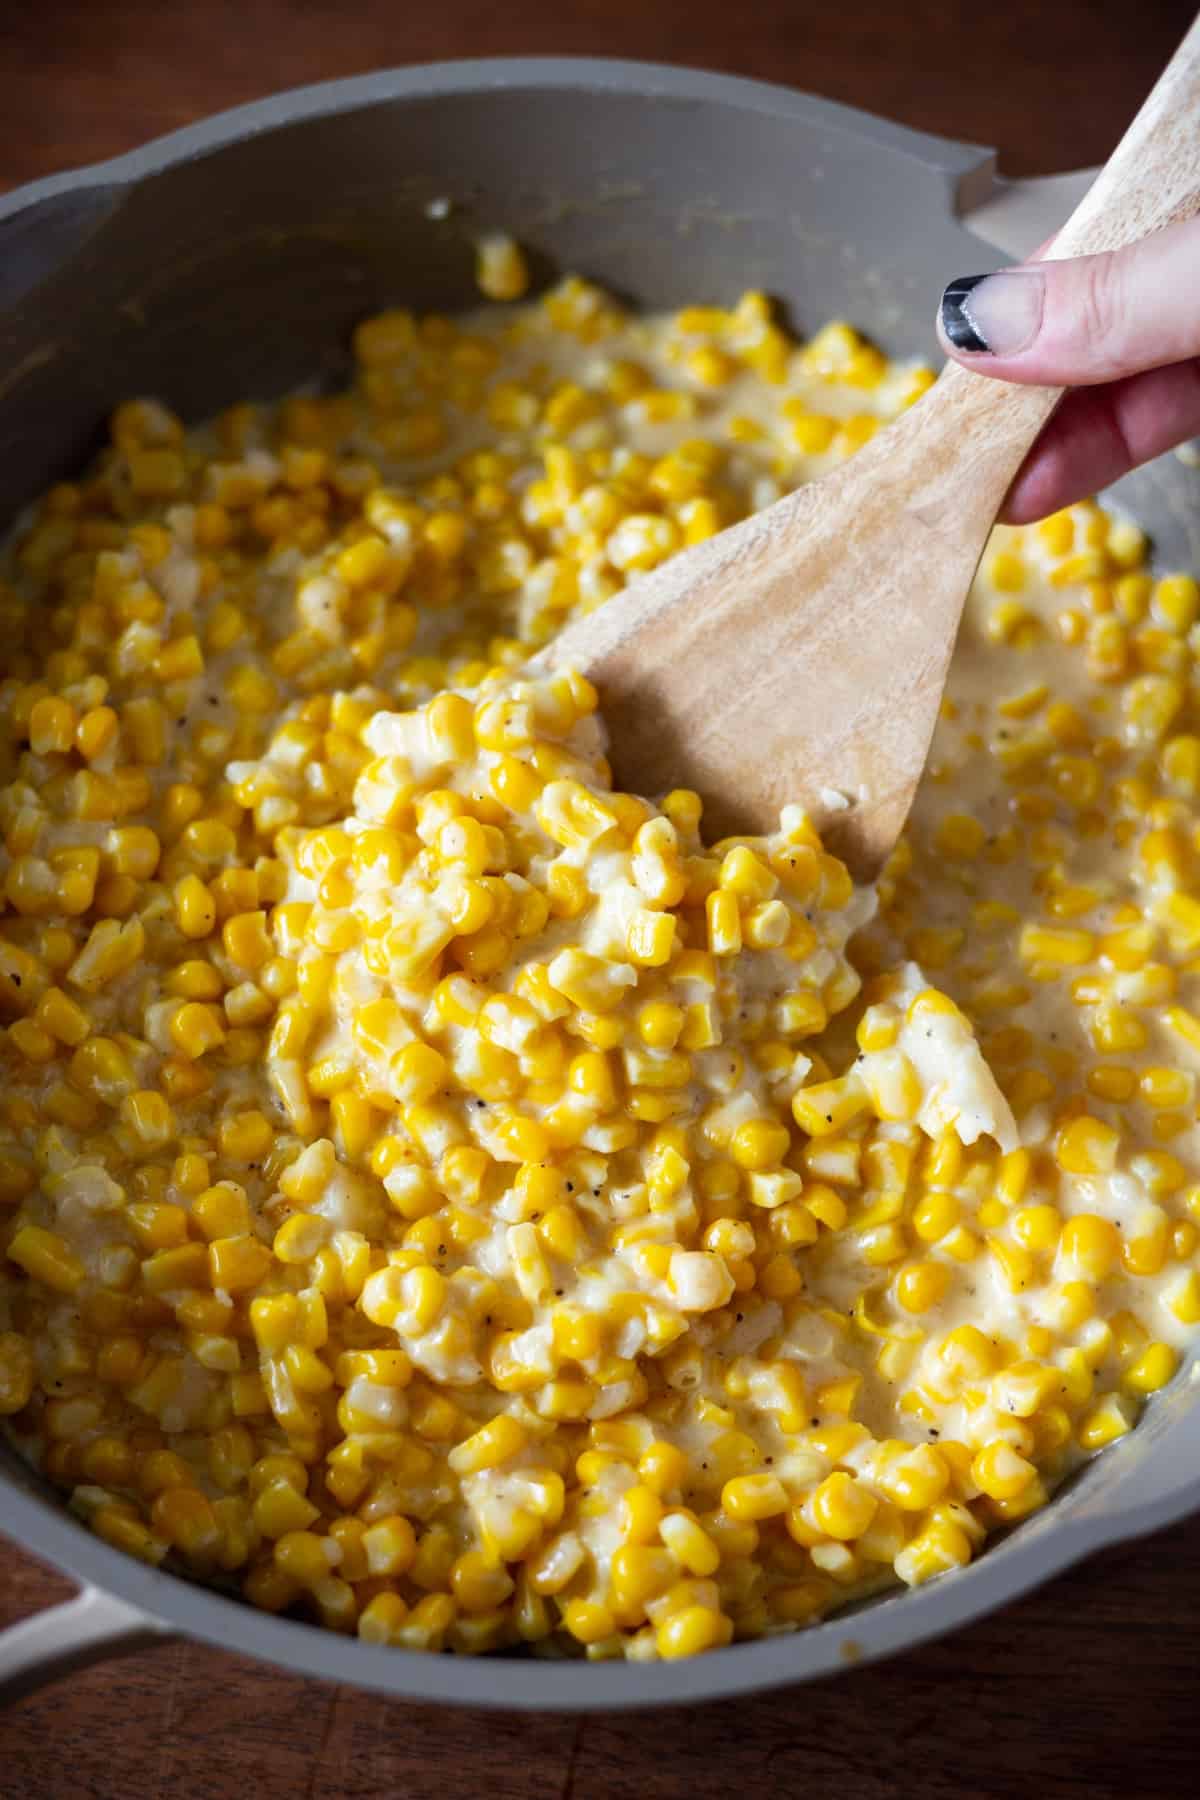 Large sauce pan of cream corn with a spoon in the center